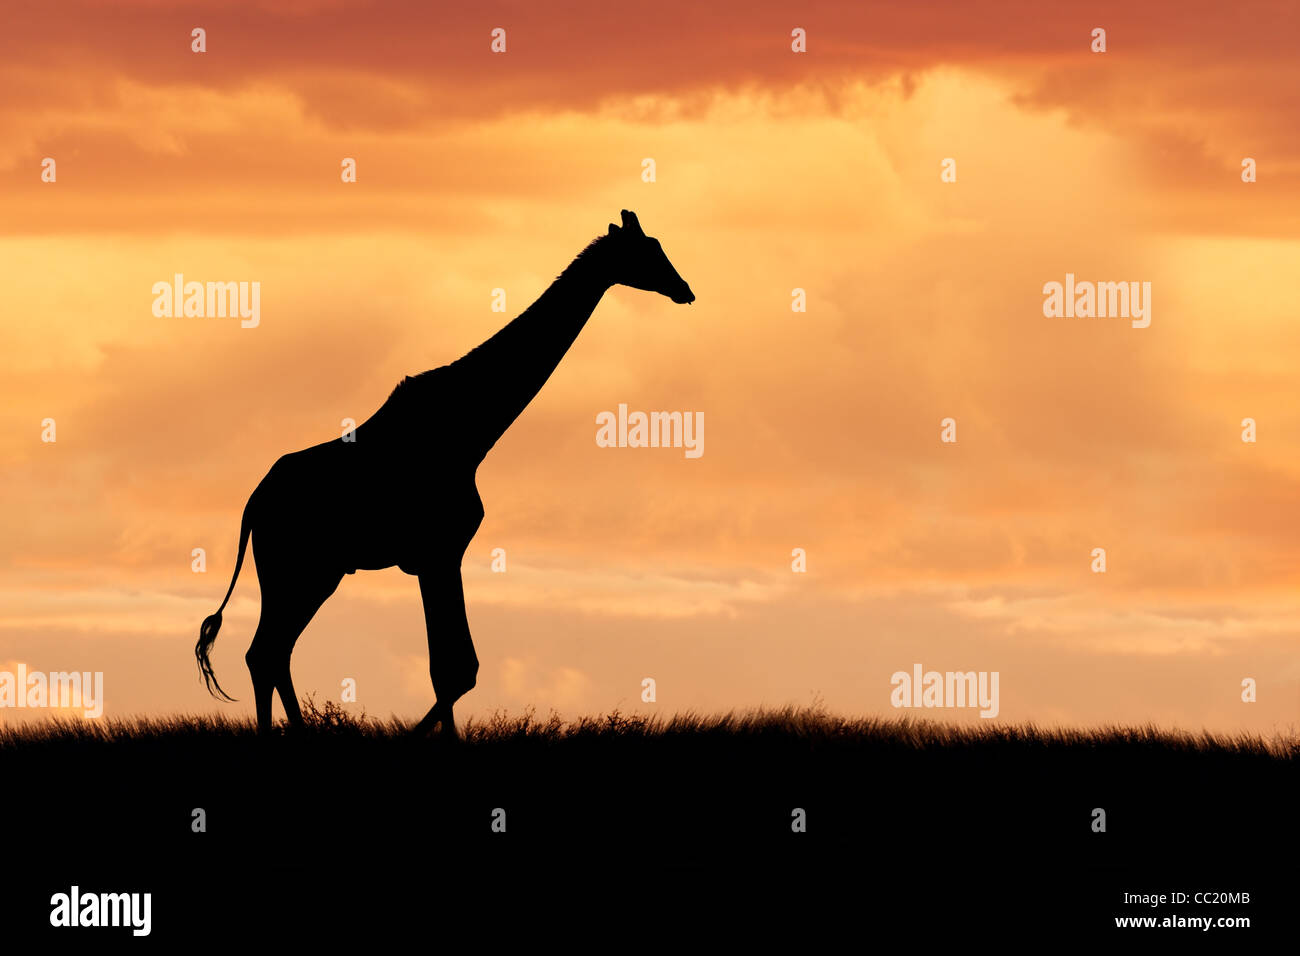 Silhouette of a giraffe walking on the African plains against a dramatic sunset Stock Photo